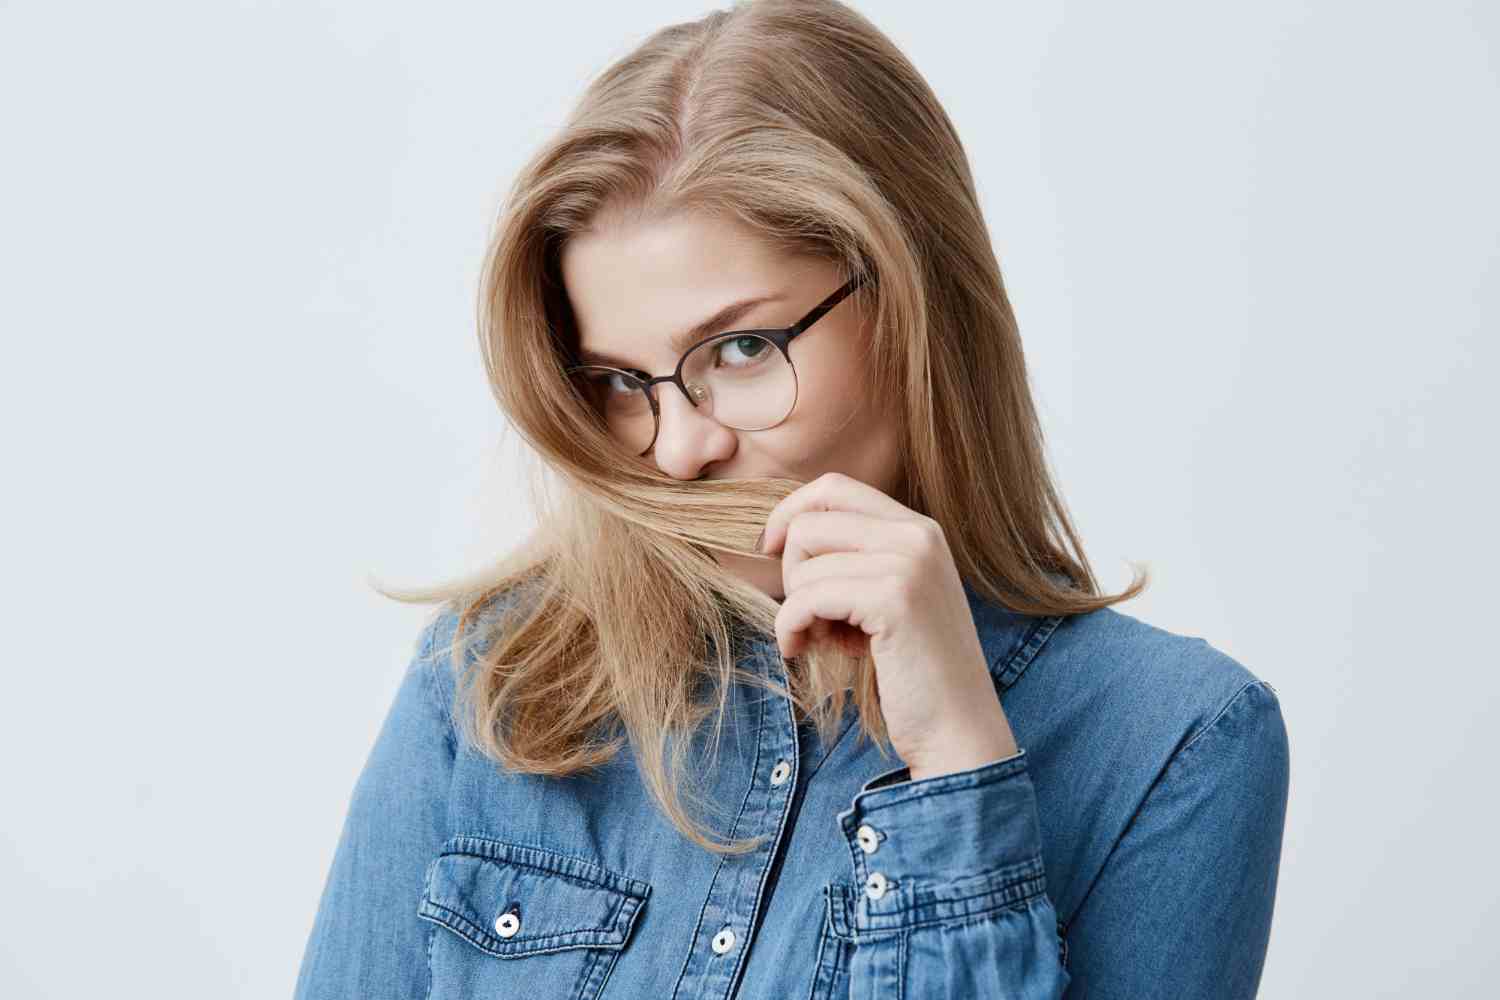 youth happiness concept beautiful caucasian teenage girl denim shirt looking camera with appeal playing with blonde hair young woman with perfect healthy skin stylish eyewear